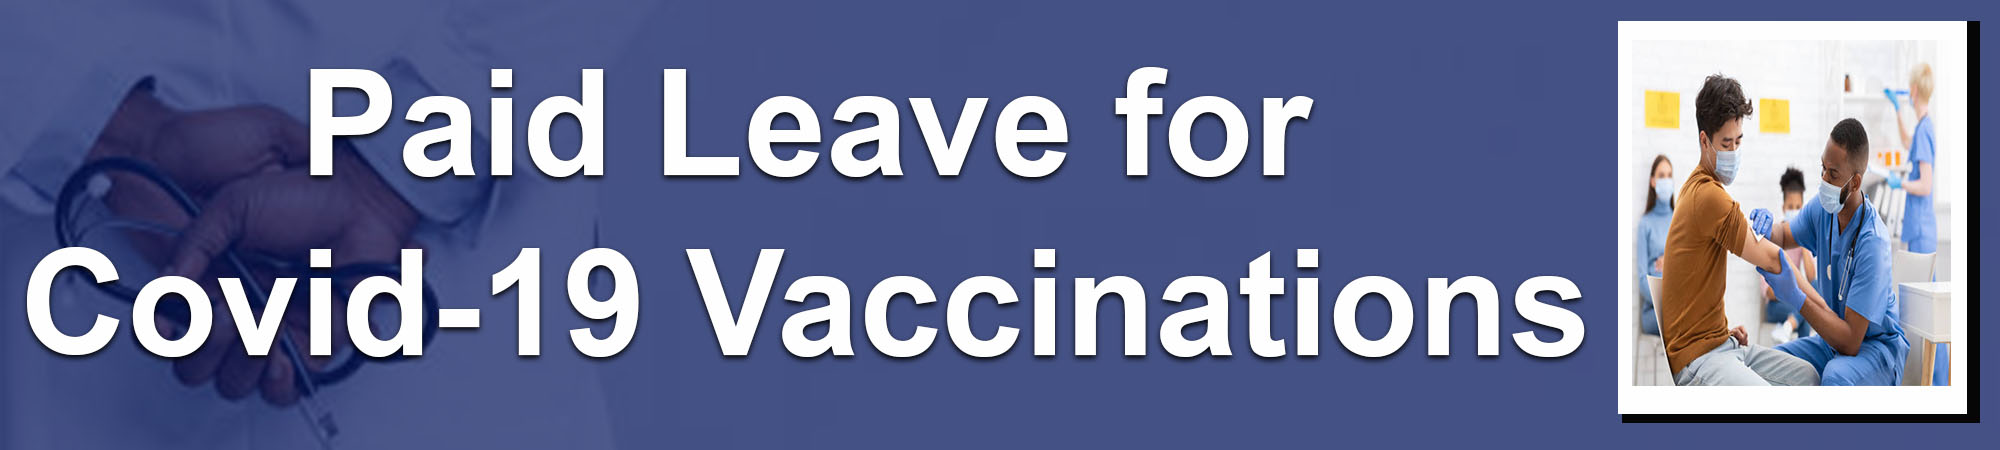 Paid leave for vaccinations